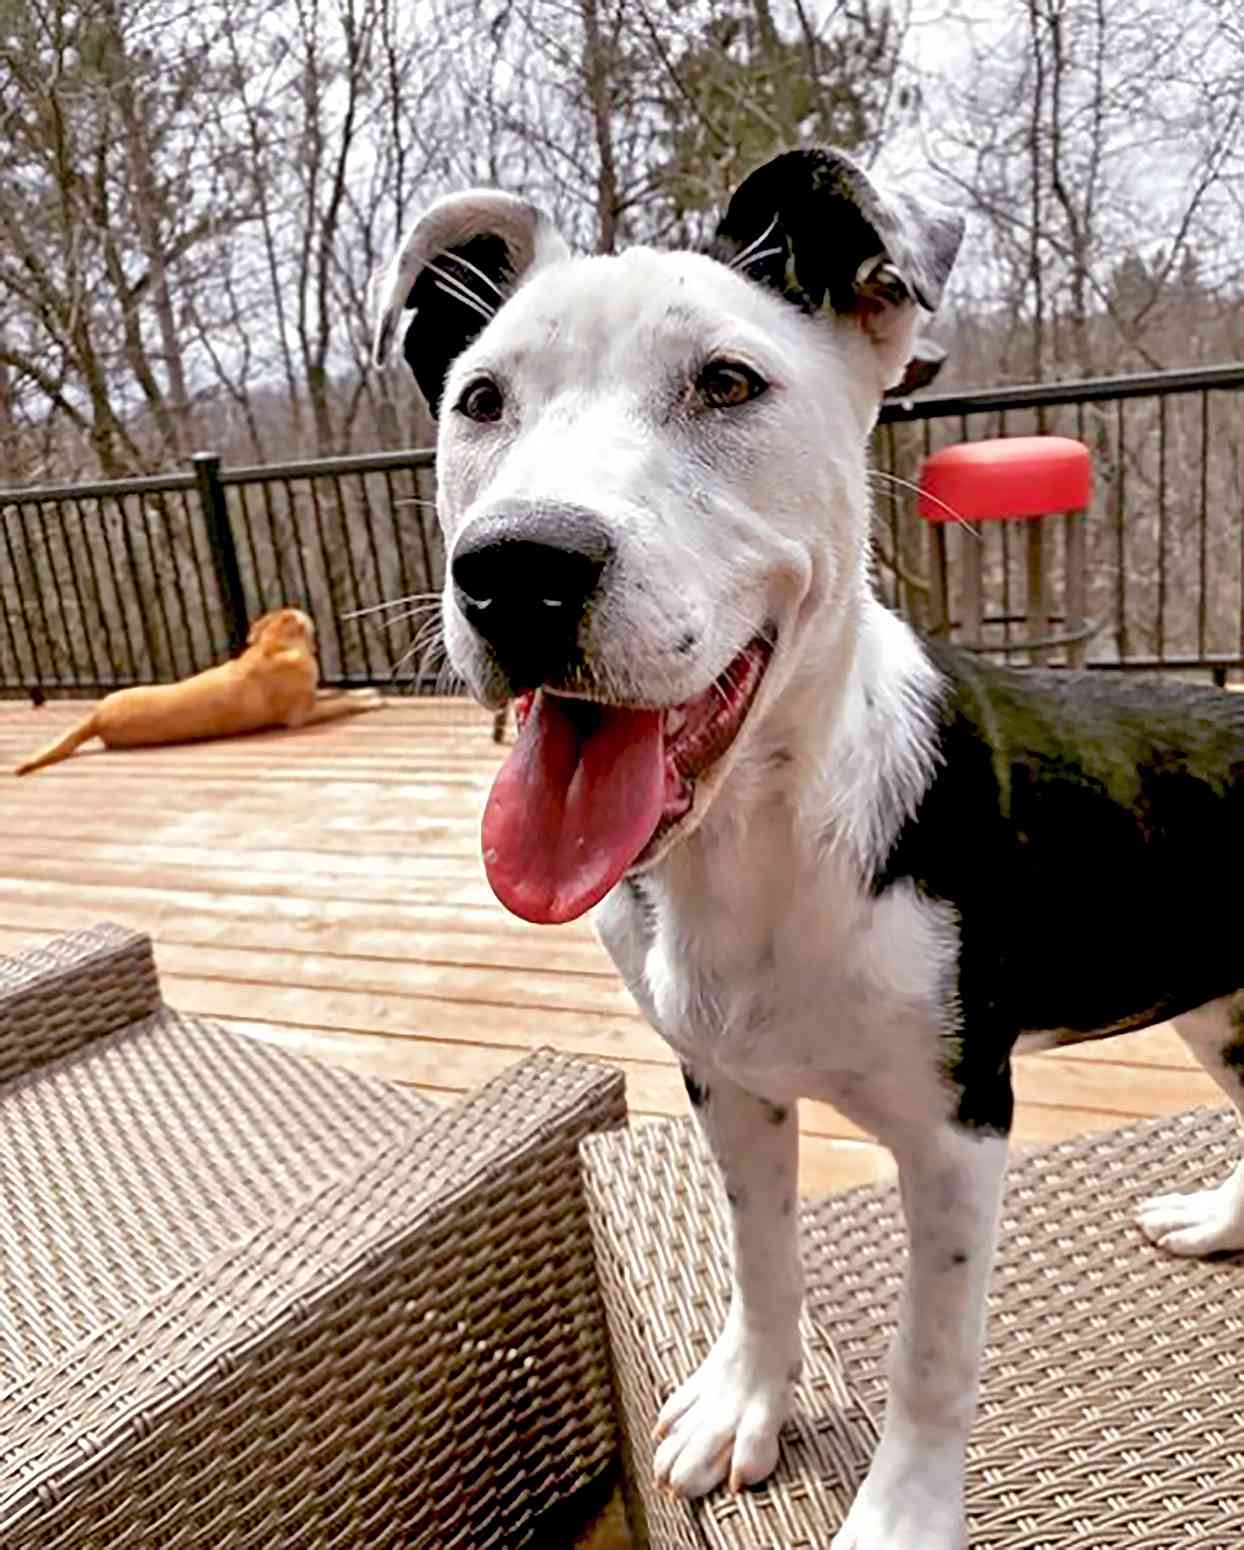 Black and white Pitmation (Pitbull Dalmation mix) with some spots standing on his deck